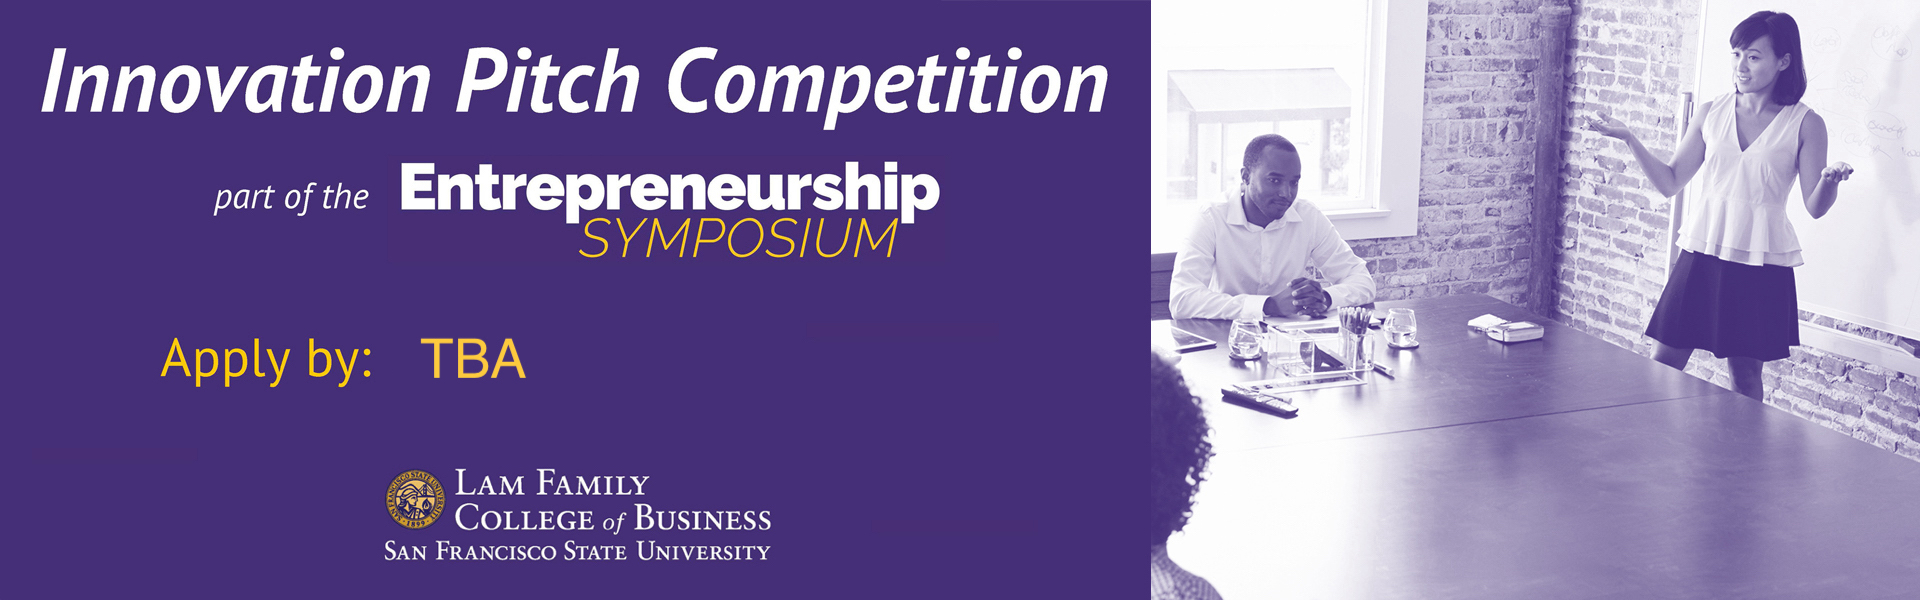 Entrepreneurship Symposium Pitch Competition - NO DATE - group of professionals in conference room